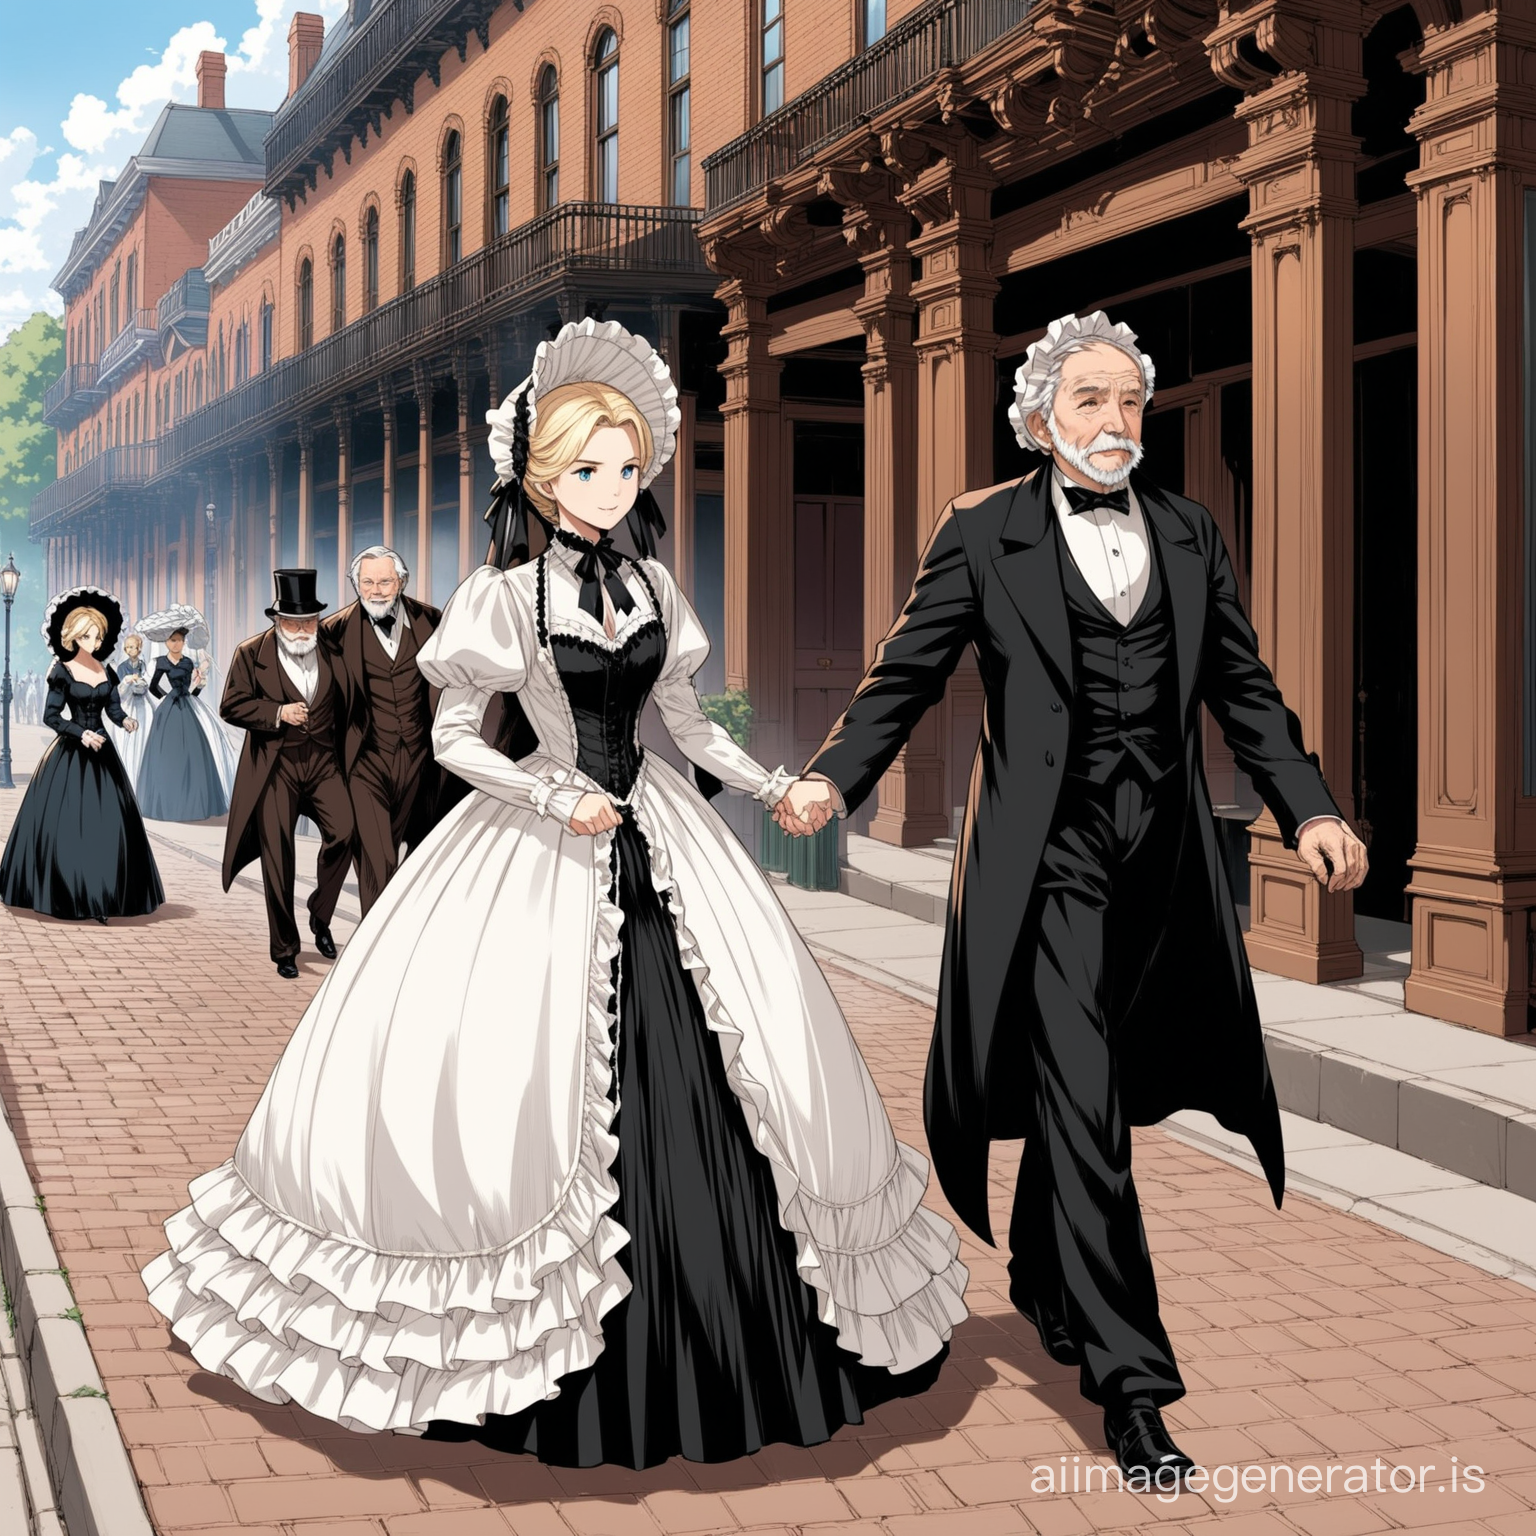 Susan Storm from the FF4 wearing a black floor-length loose billowing 1860 Victorian crinoline poofy dress with a frilly bonnet walking on a Victorian era sidewalk with an old man dressed into a black Victorian suit who seems to be her newlywed husband